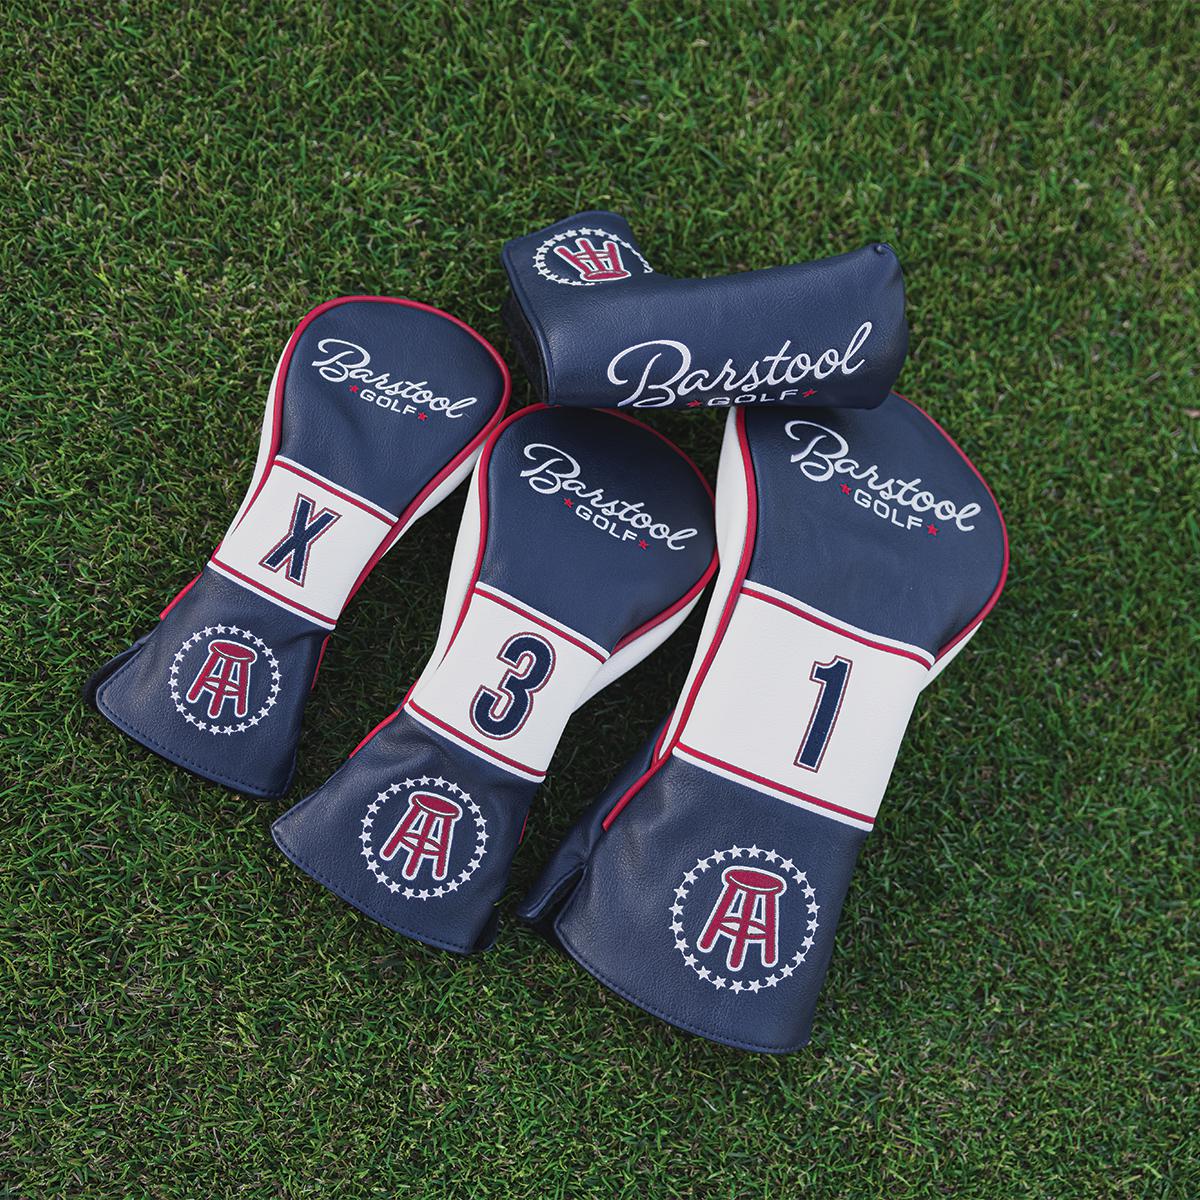 Barstool Golf Fairway Headcover-Golf Accessories-Fore Play-Navy-One Size-Barstool Sports